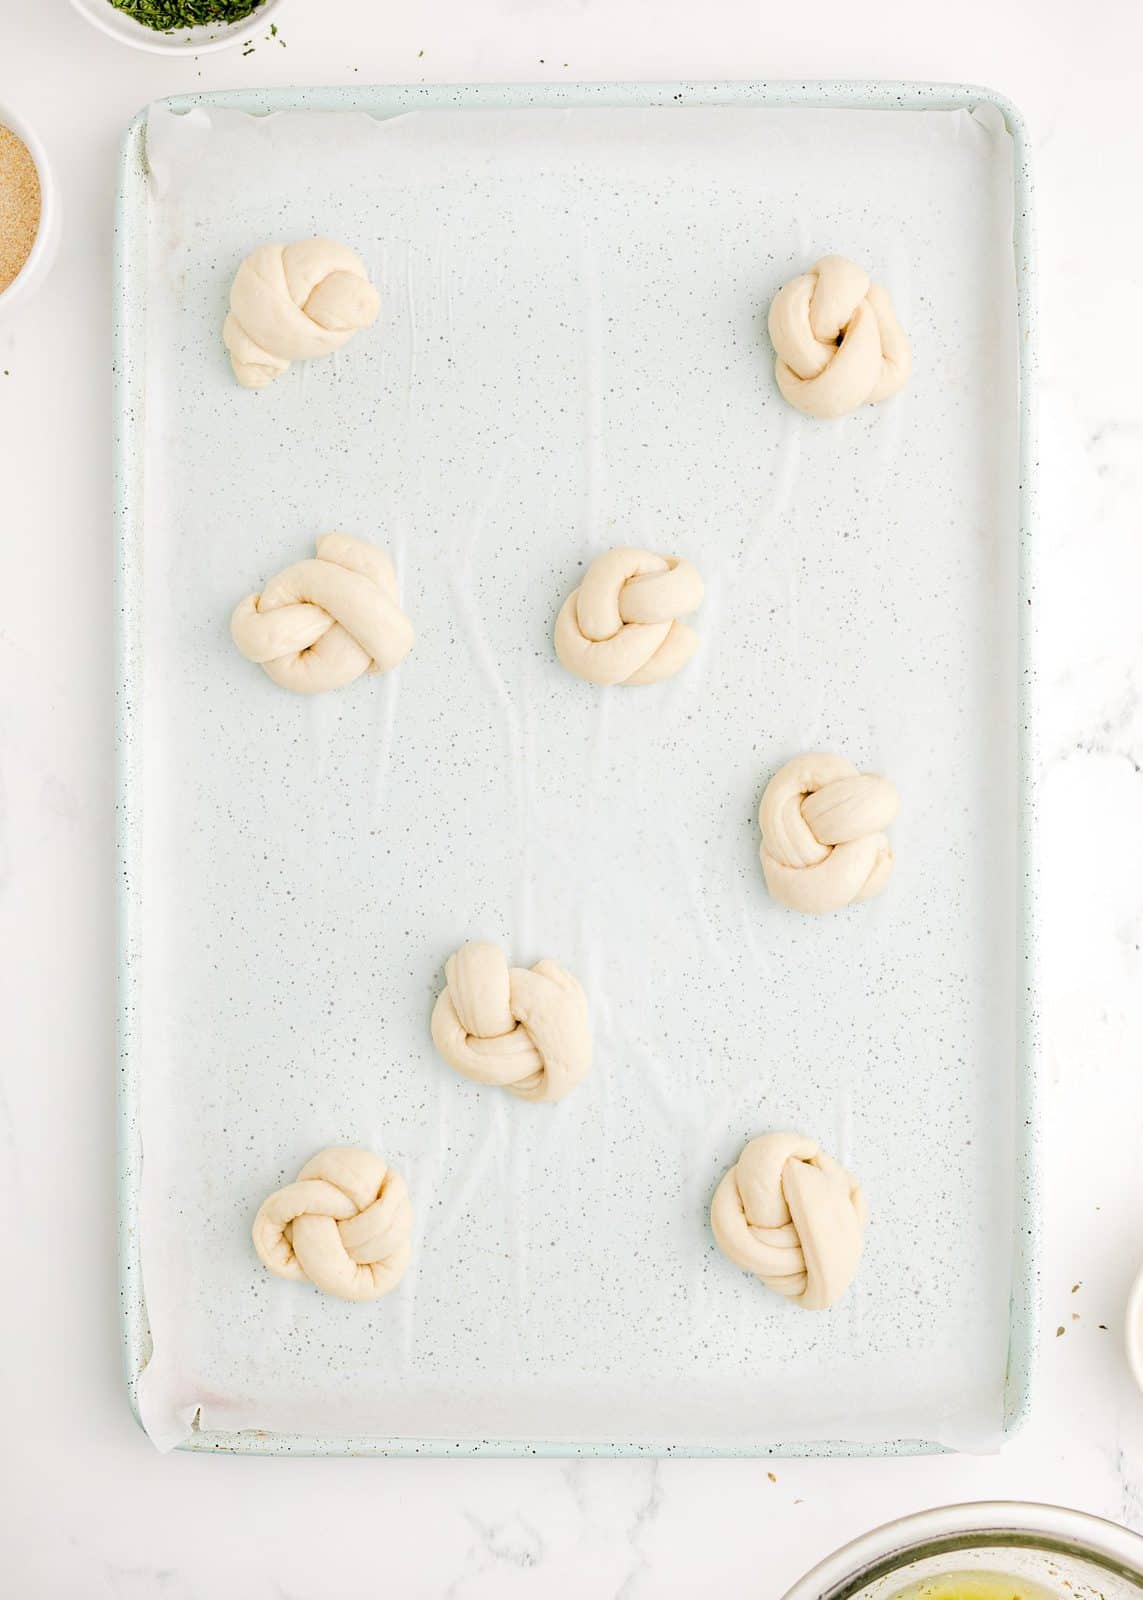 Garlic knots placed on parchment line baking sheet.